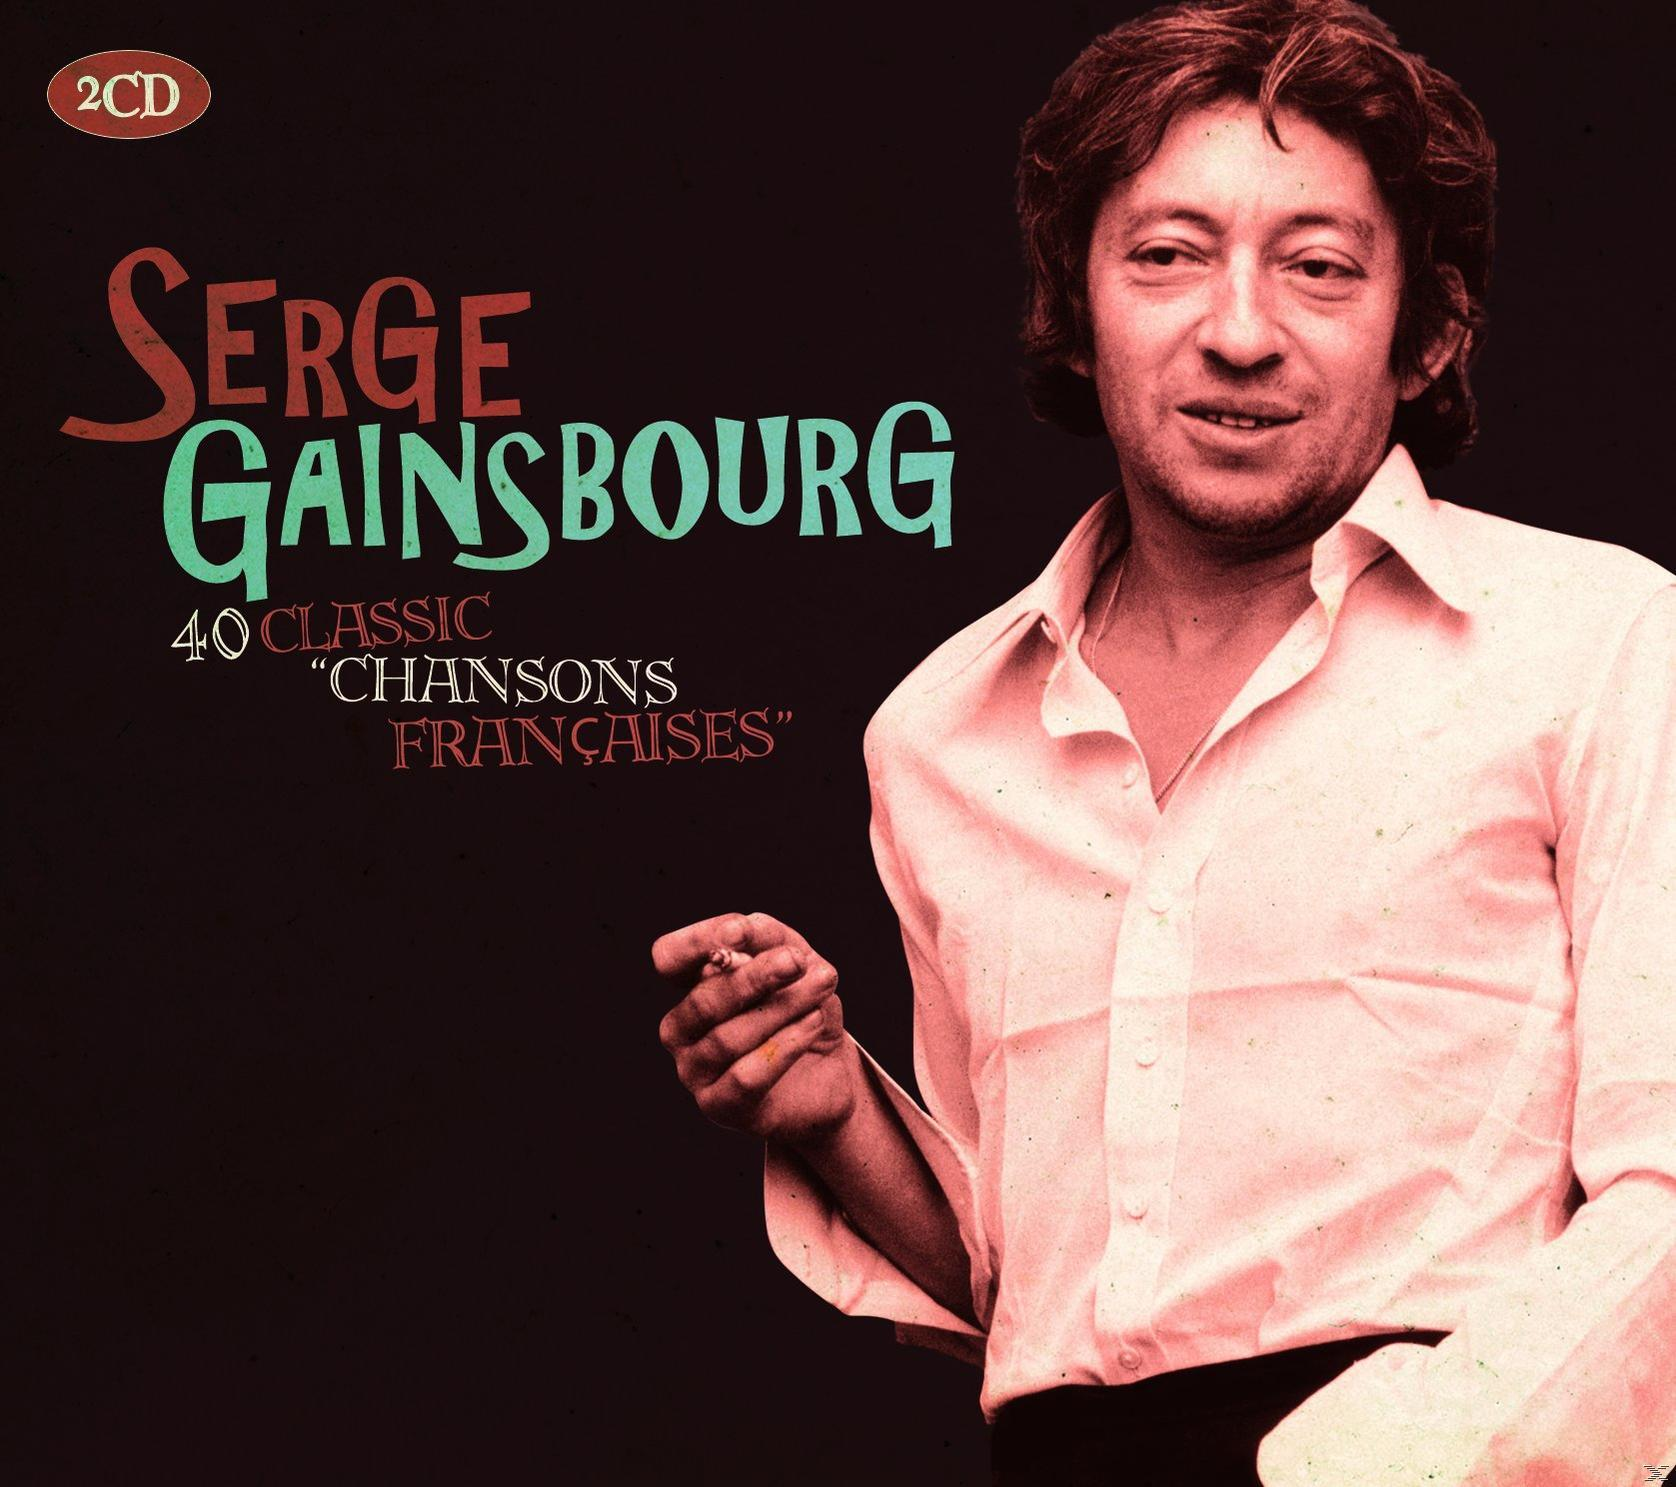 (CD) Serge Classic Chansons Francaise - - Gainsbourg